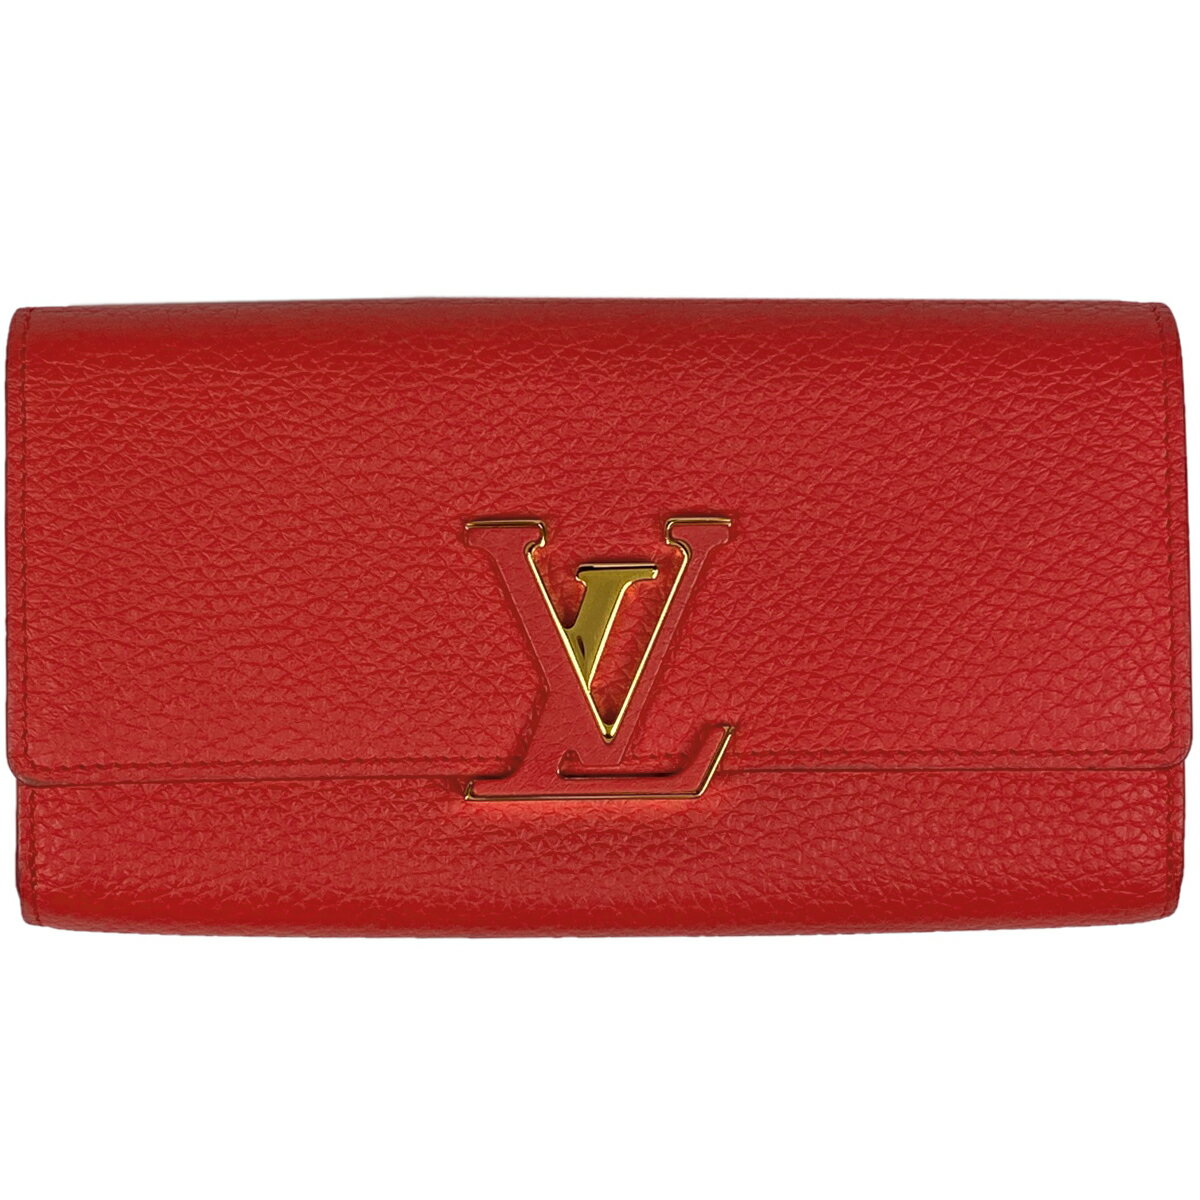 15OFF ybsOzCEBg Louis Vuitton |gtHC JvV[k D K z g R[^q`(sN) M69068 fB[X yÁz msp29